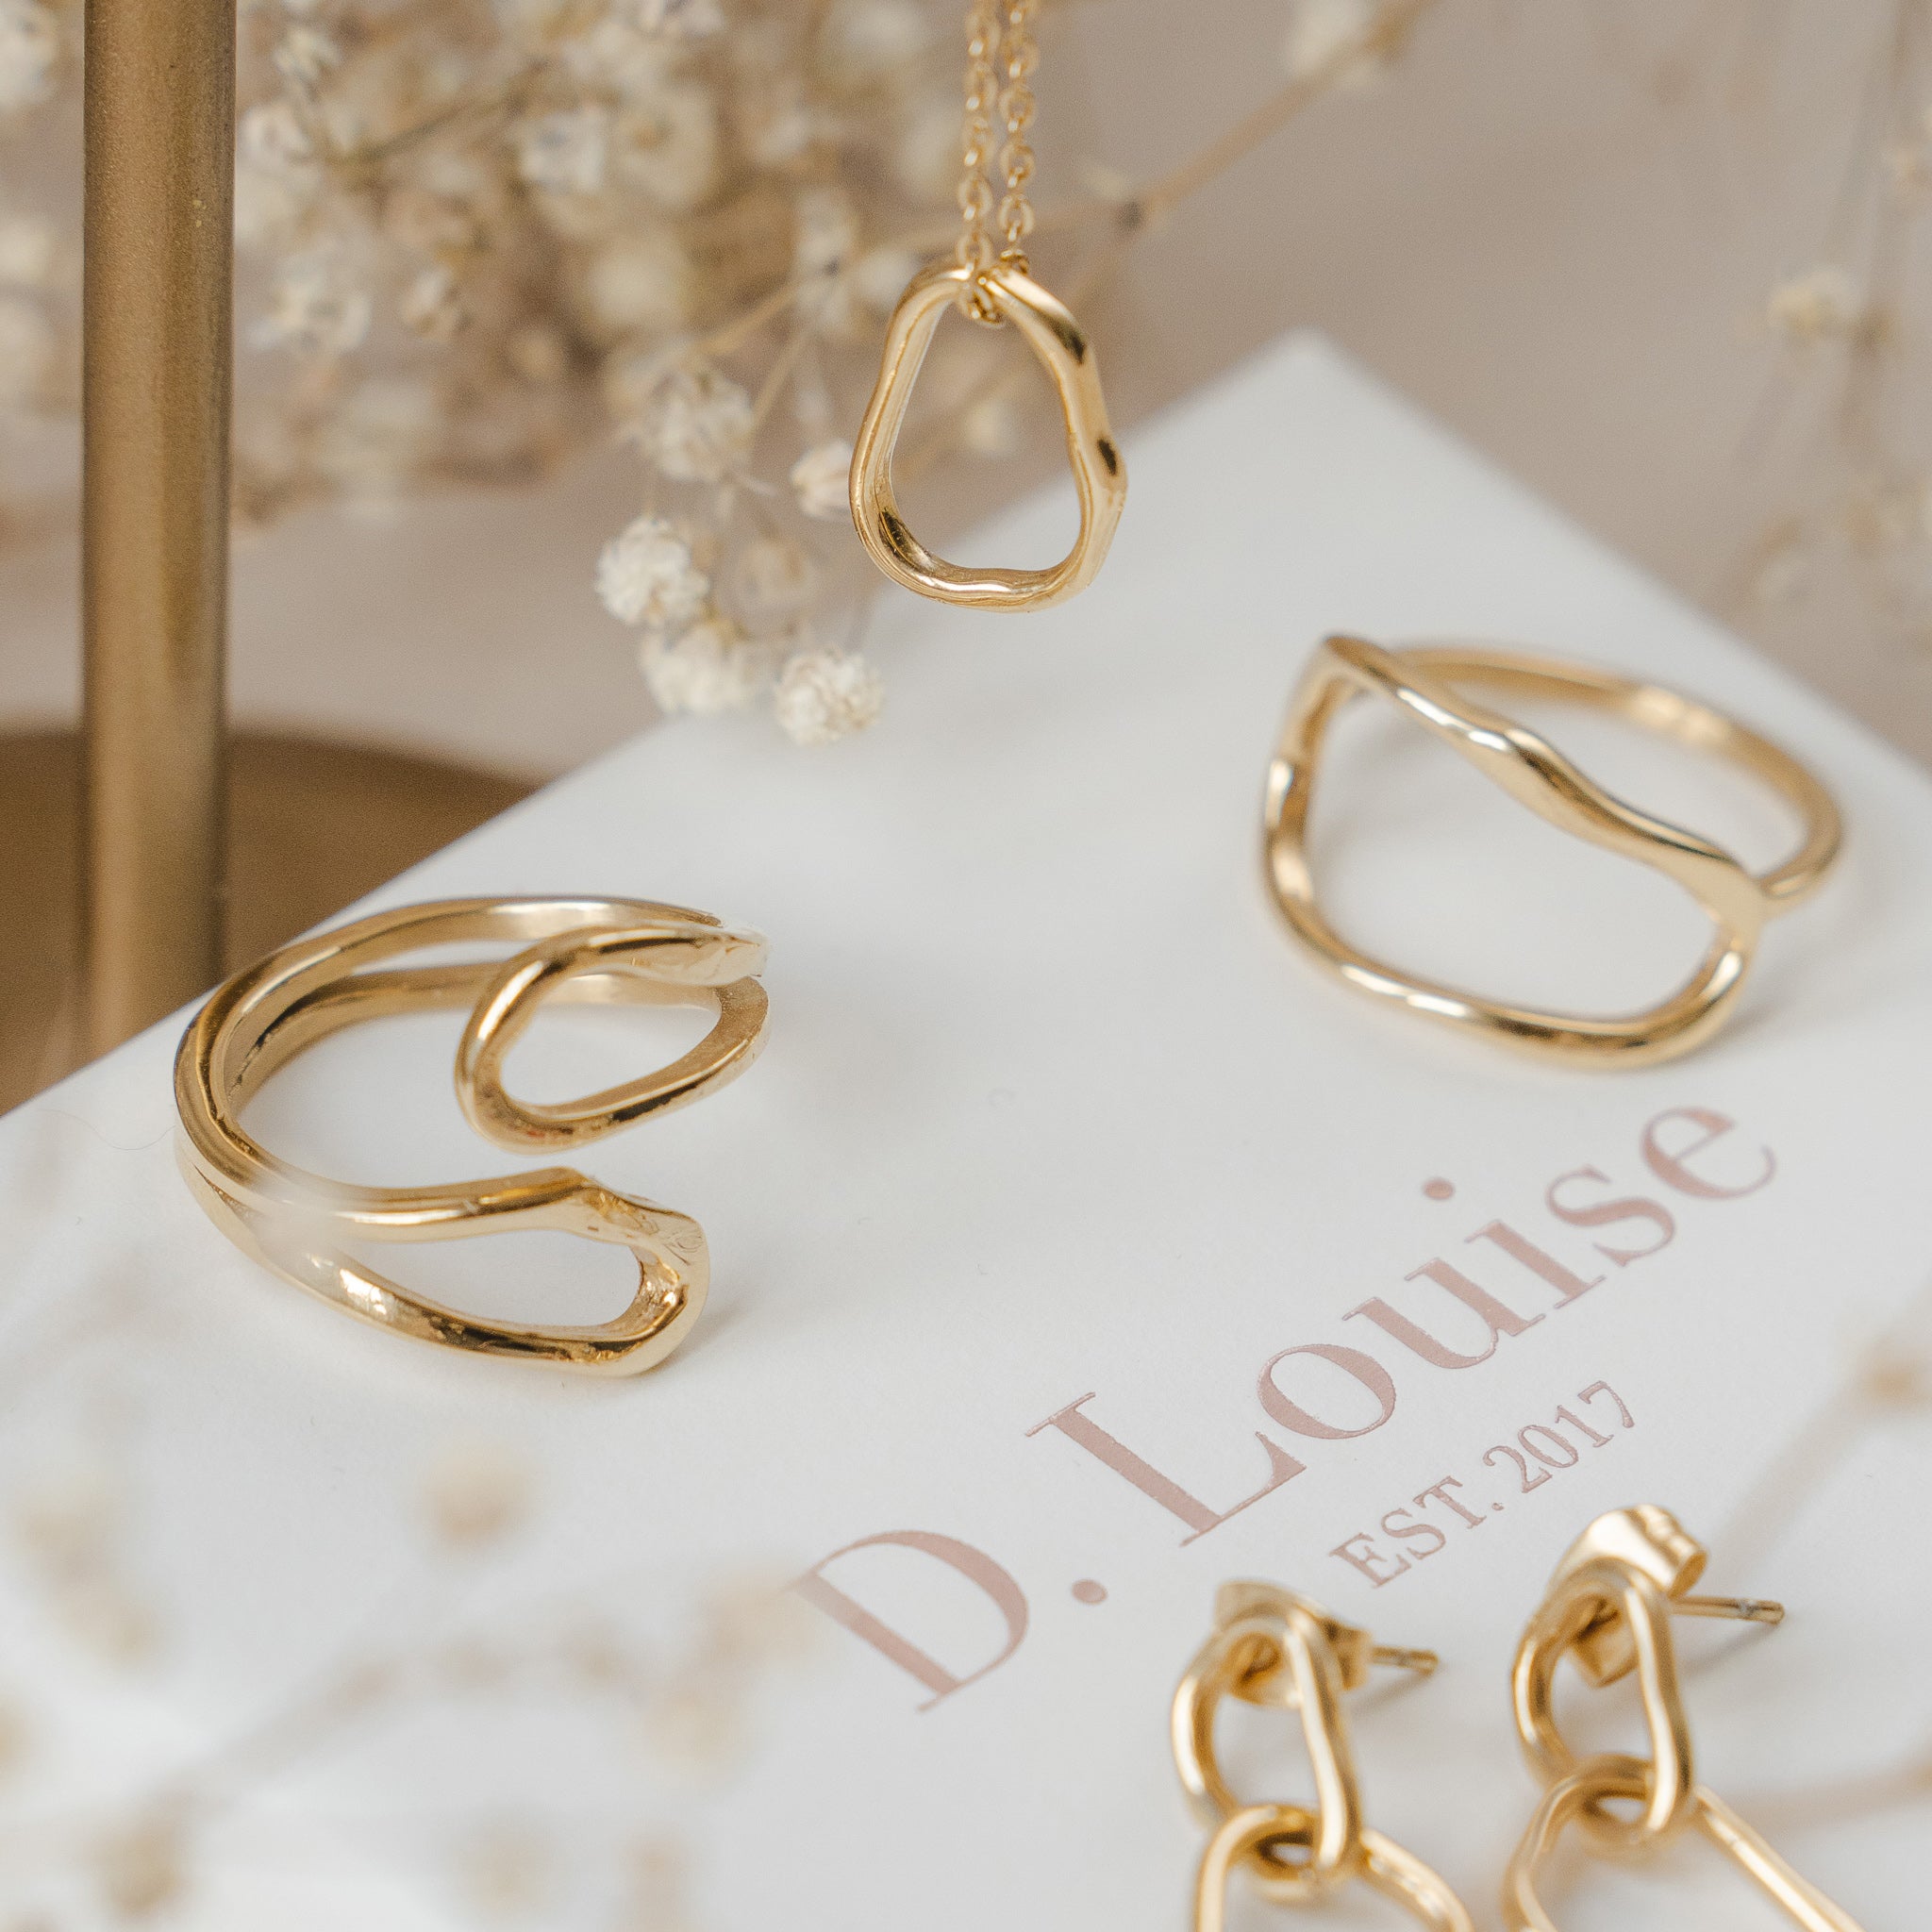 Outlined – D.Louise Jewellery